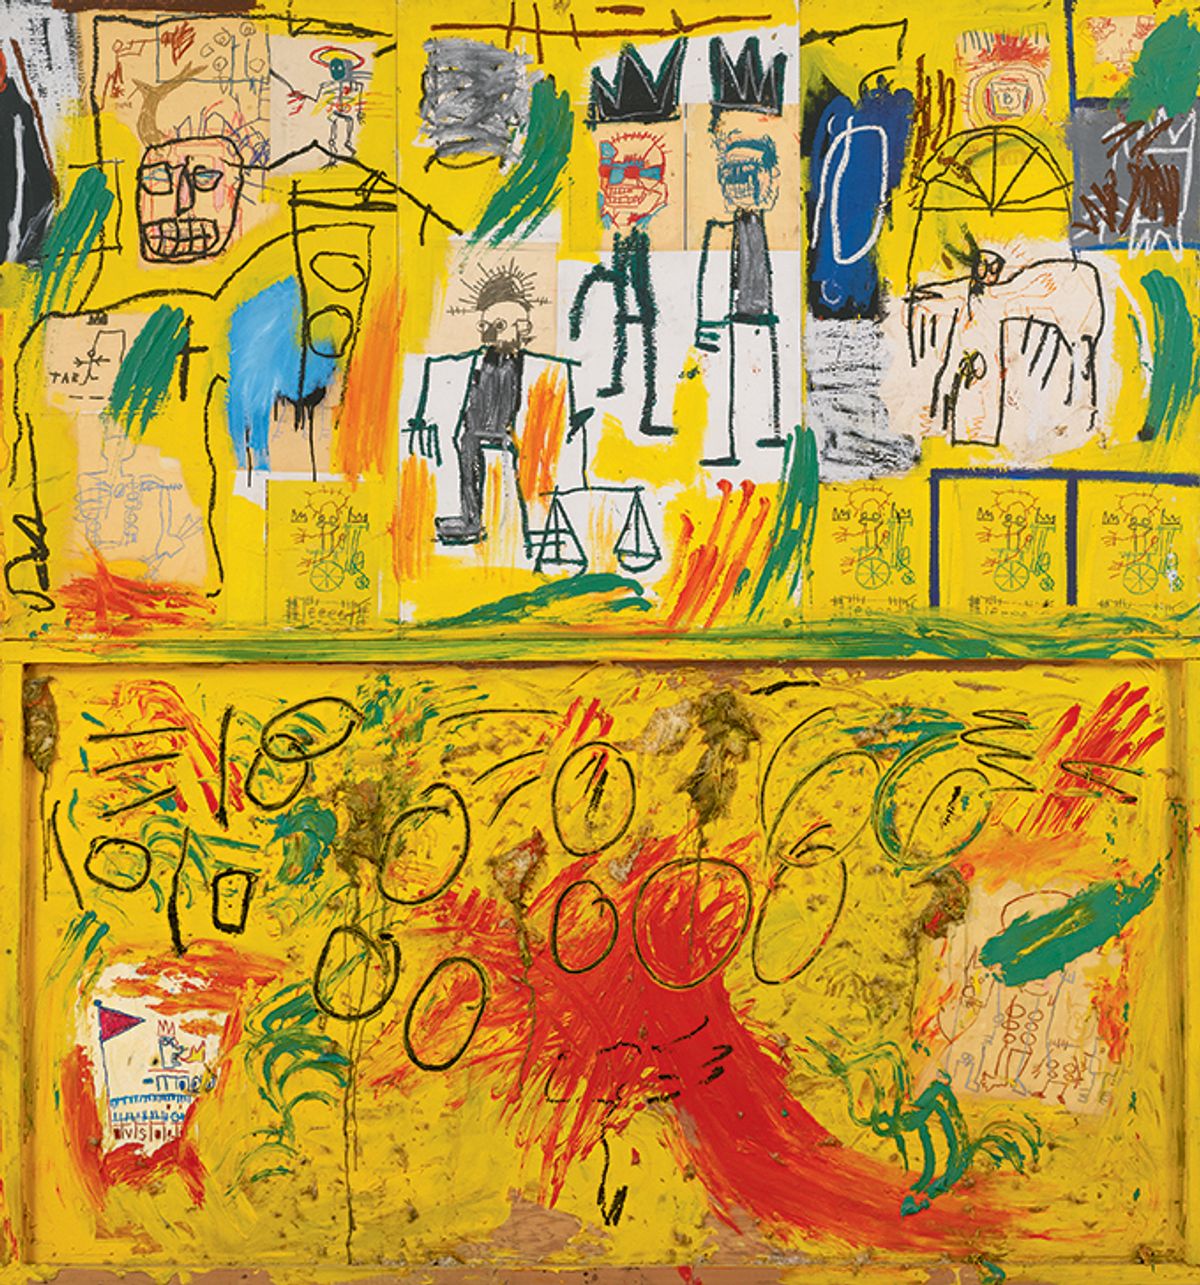 Untitled (Yellow Tar and Feathers) (1981) by Jean-Michel Basquiat Photo courtesy of the Banco do Brasil Cultural Centre